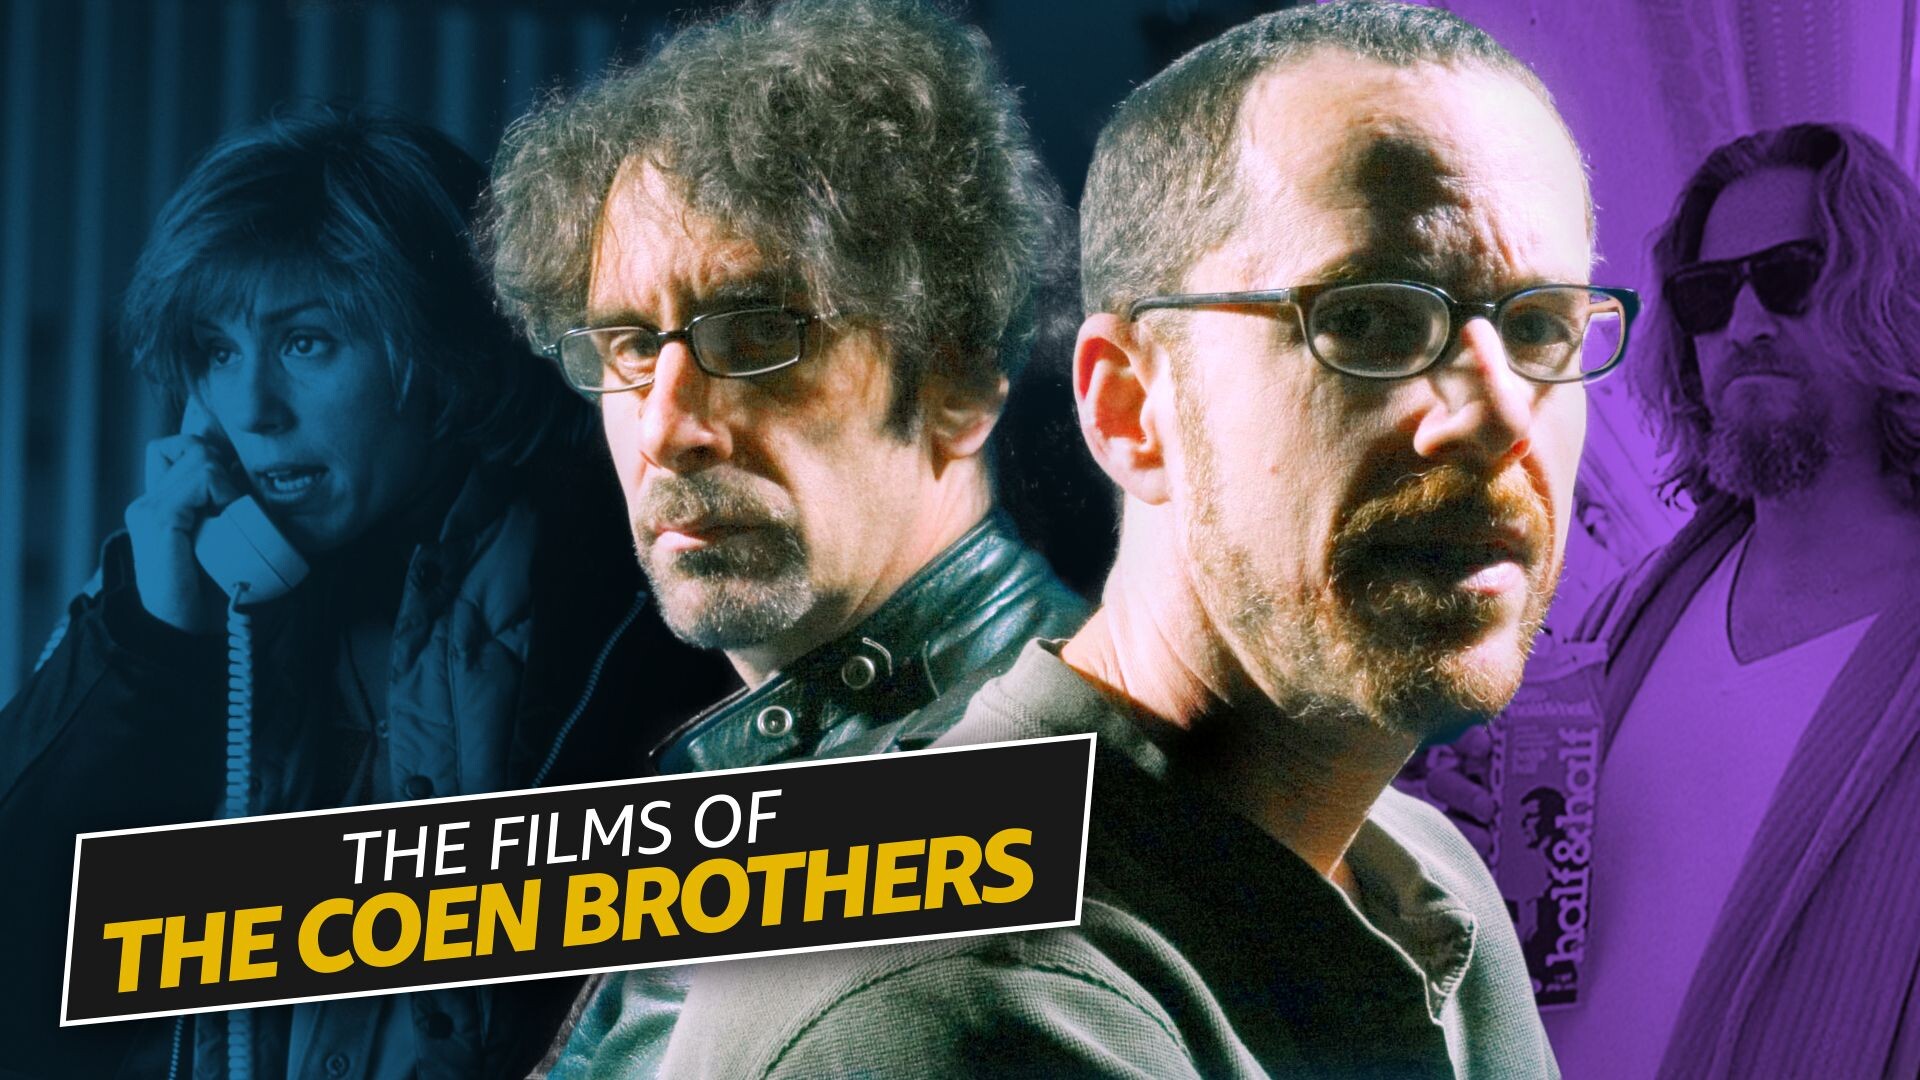 Coen Brothers, Stunning landscapes, Peculiar characters, Academy Award winners, 1920x1080 Full HD Desktop